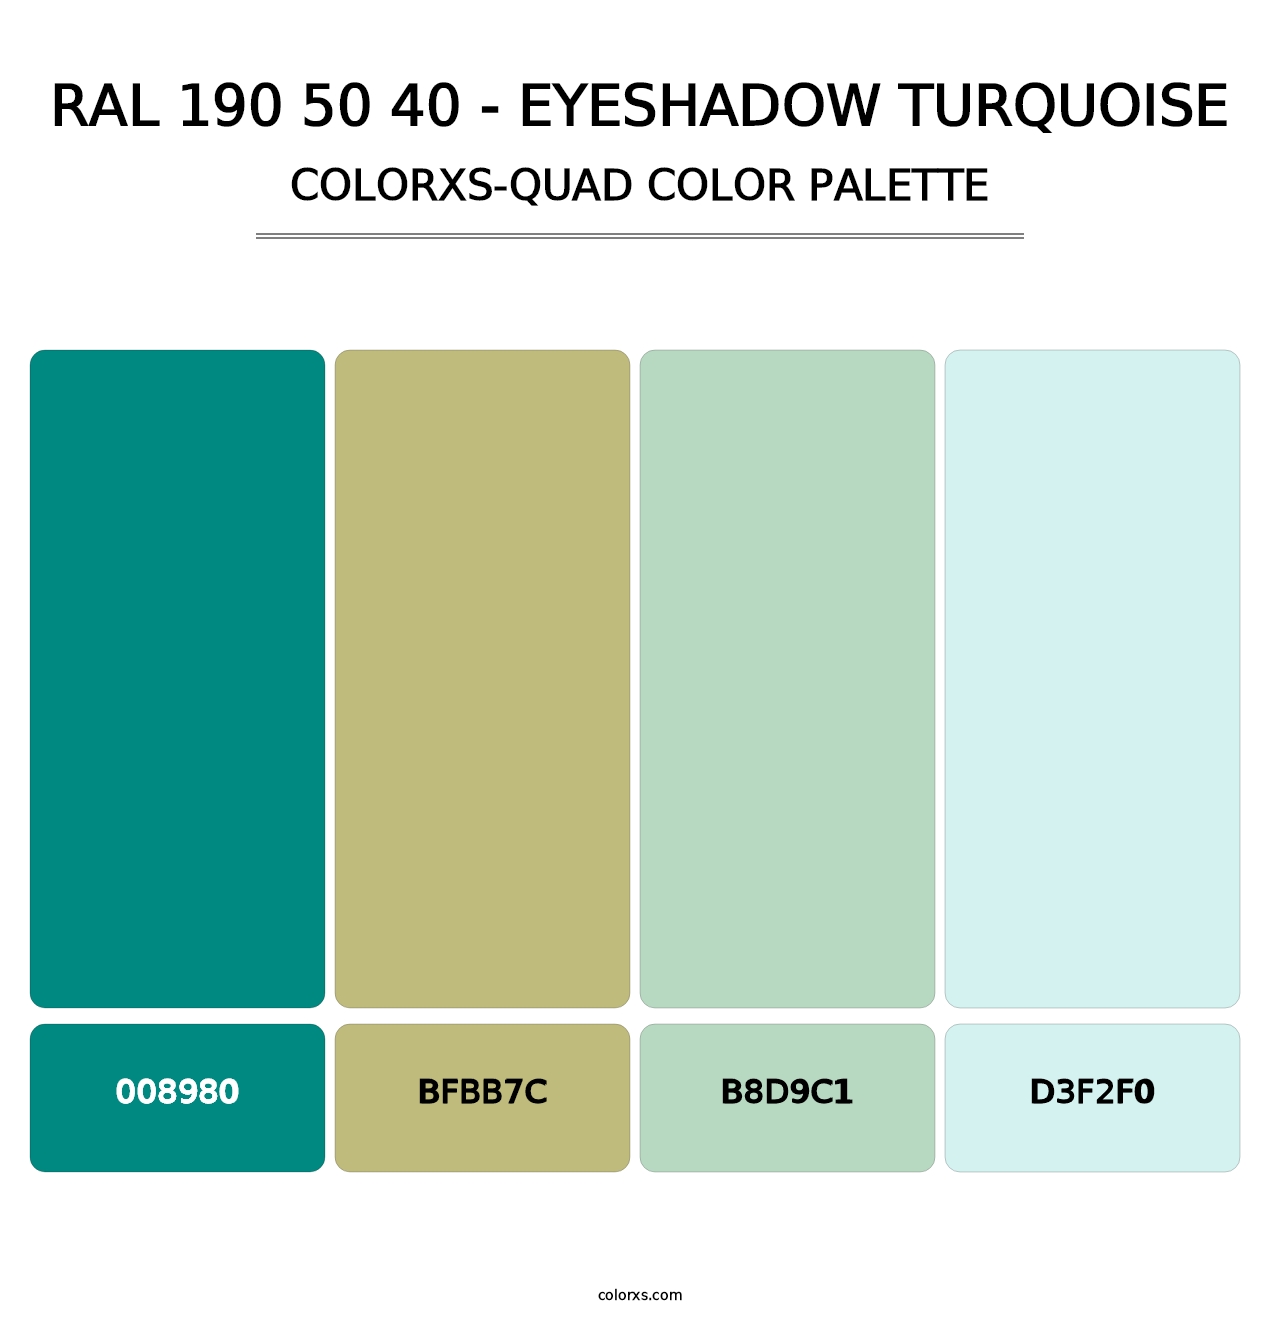 RAL 190 50 40 - Eyeshadow Turquoise - Colorxs Quad Palette